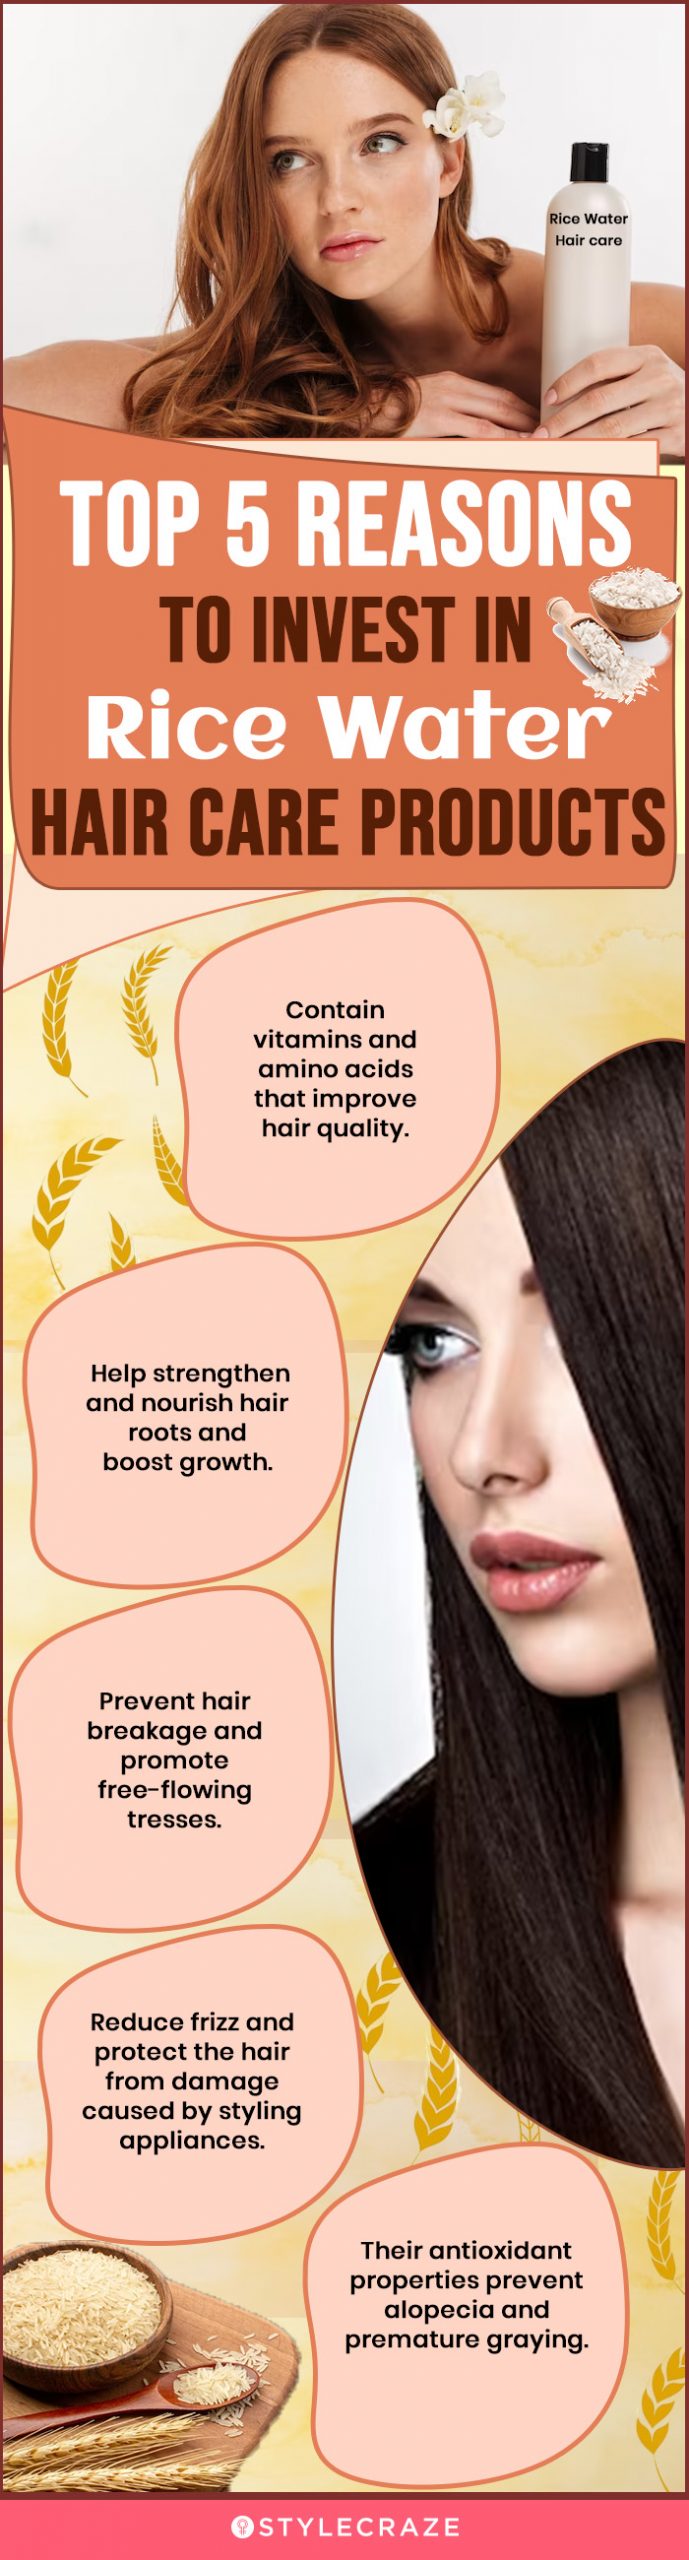 Top 5 Reasons To Invest In Rice Water Hair Care Products (infographic)